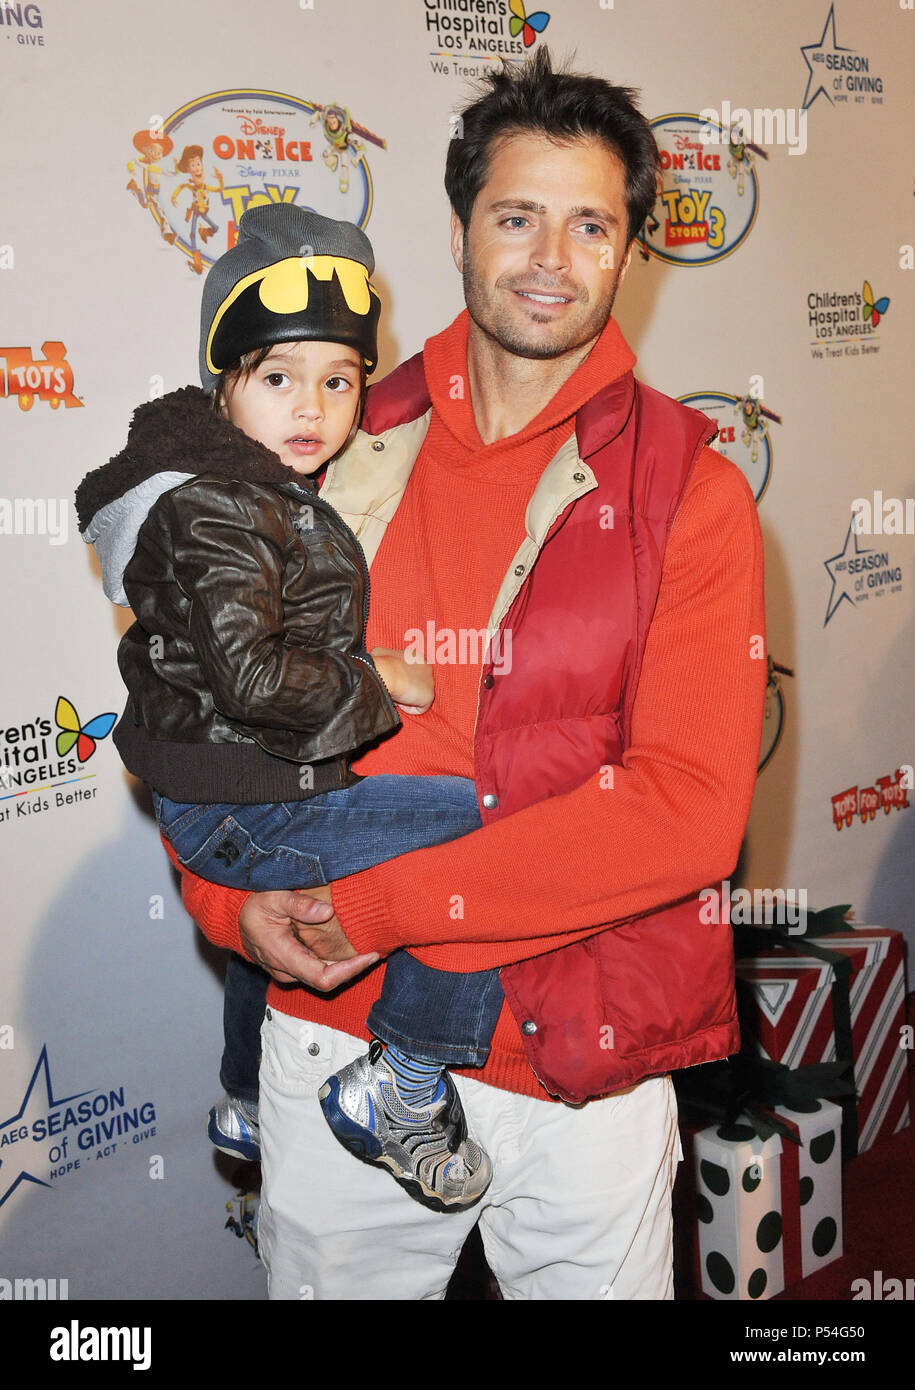 david Charvet, daughter  at Toy Story 3 On Ice To benefit the Children Hospital at the Nokia Ice Skating in Los Angeles.david Charvet, daughter  ------------- Red Carpet Event, Vertical, USA, Film Industry, Celebrities,  Photography, Bestof, Arts Culture and Entertainment, Topix Celebrities fashion /  Vertical, Best of, Event in Hollywood Life - California,  Red Carpet and backstage, USA, Film Industry, Celebrities,  movie celebrities, TV celebrities, Music celebrities, Photography, Bestof, Arts Culture and Entertainment,  Topix, vertical,  family from from the year , 2011, inquiry tsuni@Gamma Stock Photo